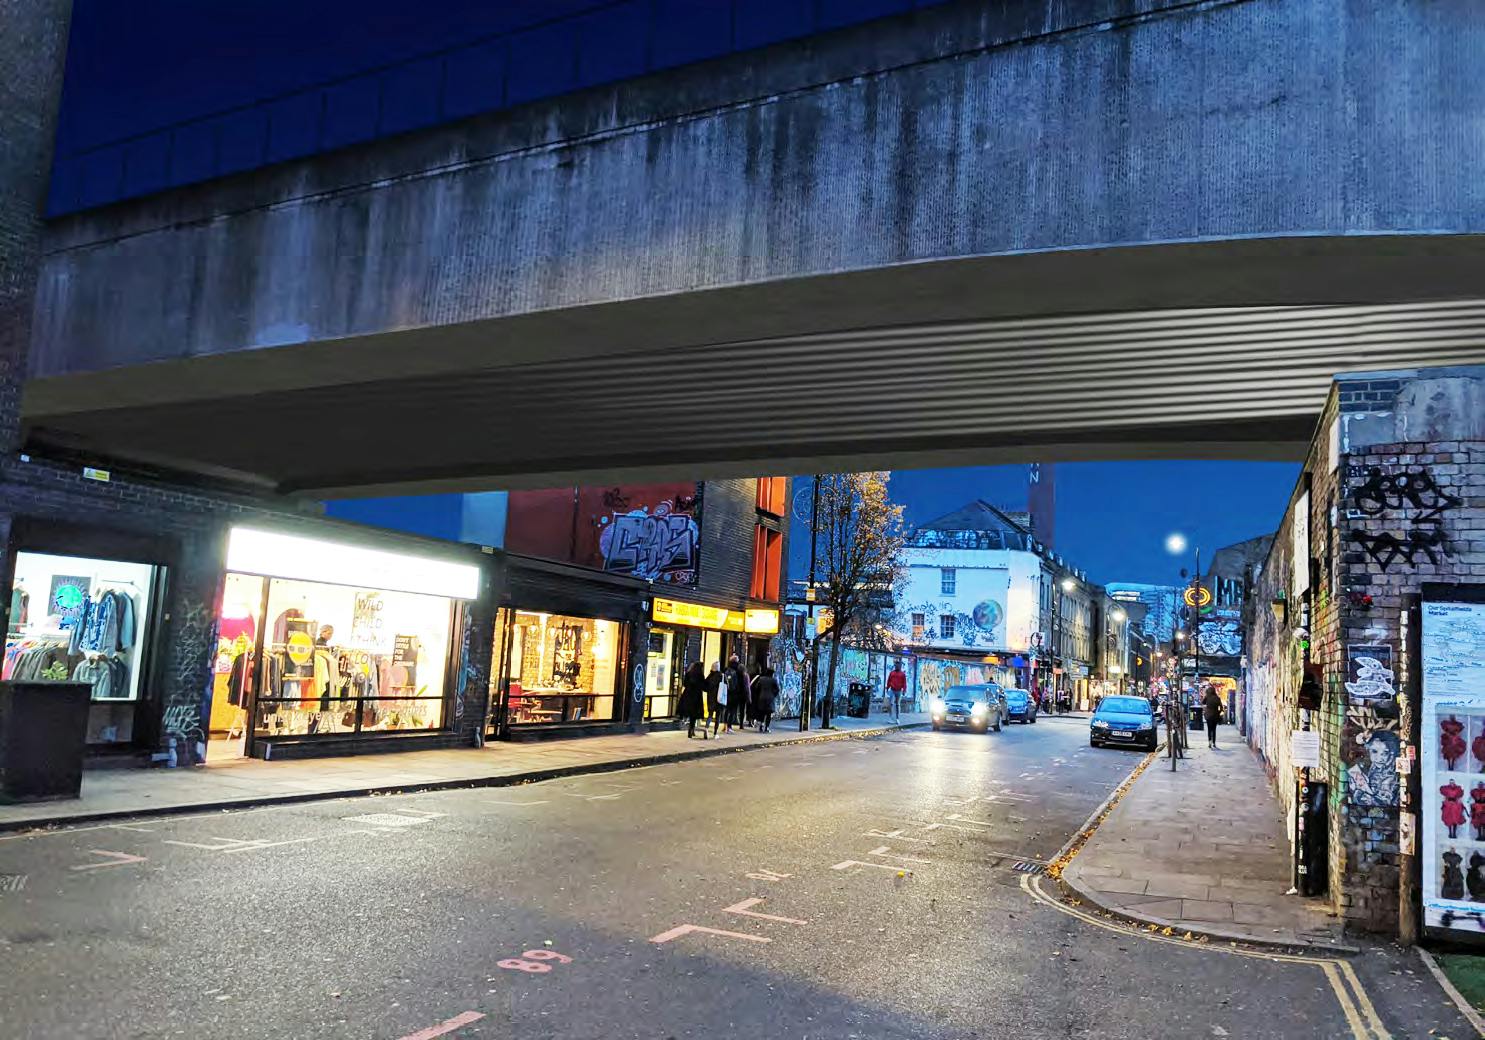 Improved lighting around the Overground bridge could enhance safety and improve the look of the area